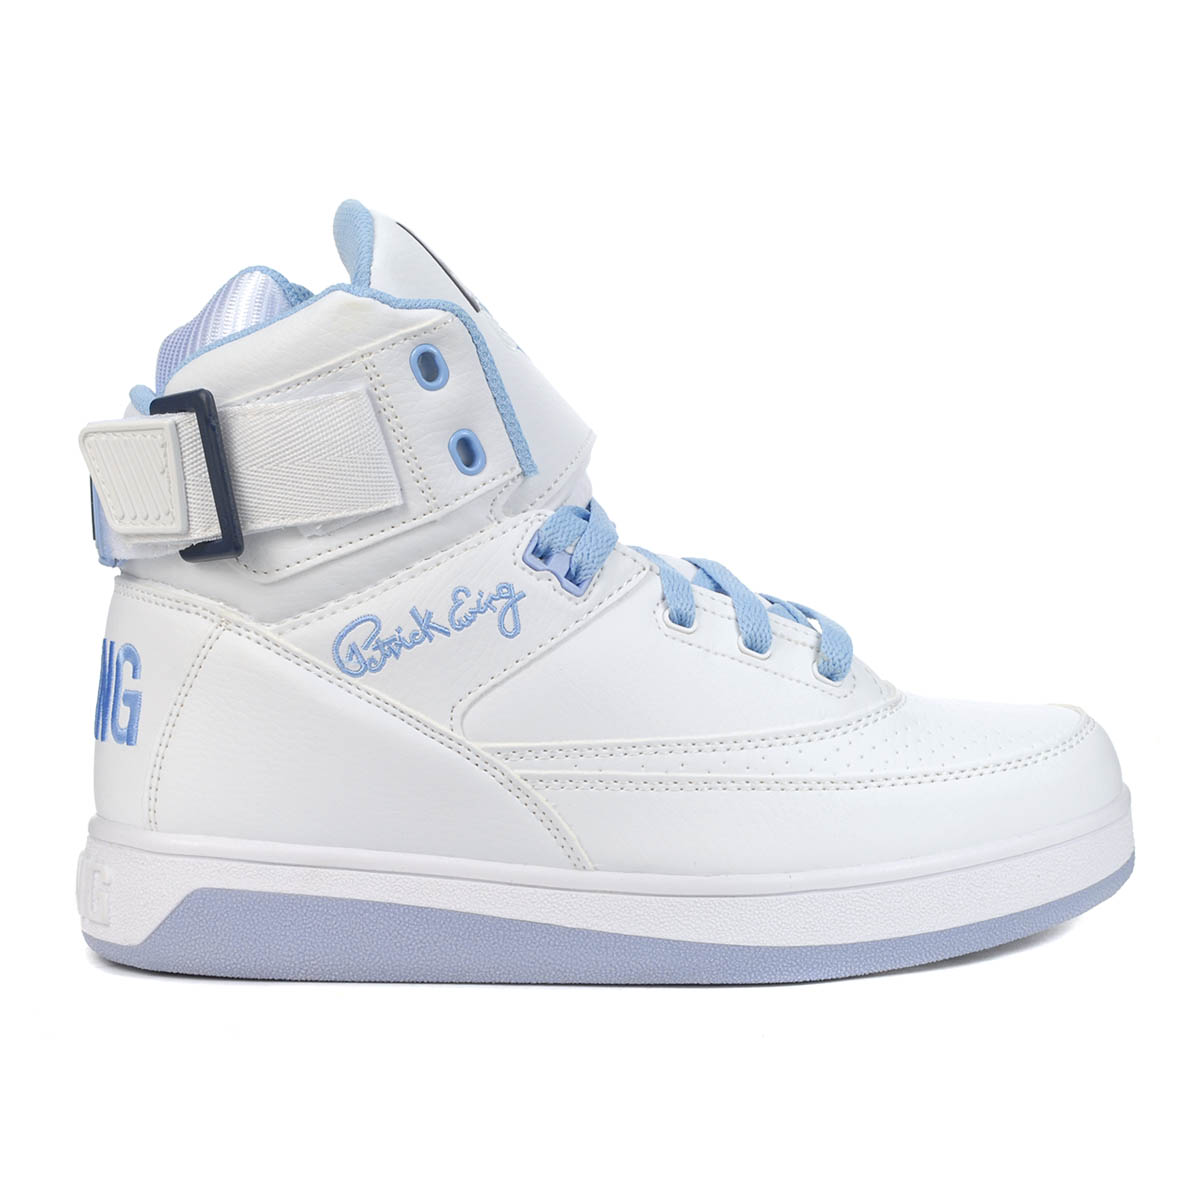 Patrick Ewing 33 HI x Orion White/Blue Bell Basketball Shoes - WOOKI.COM